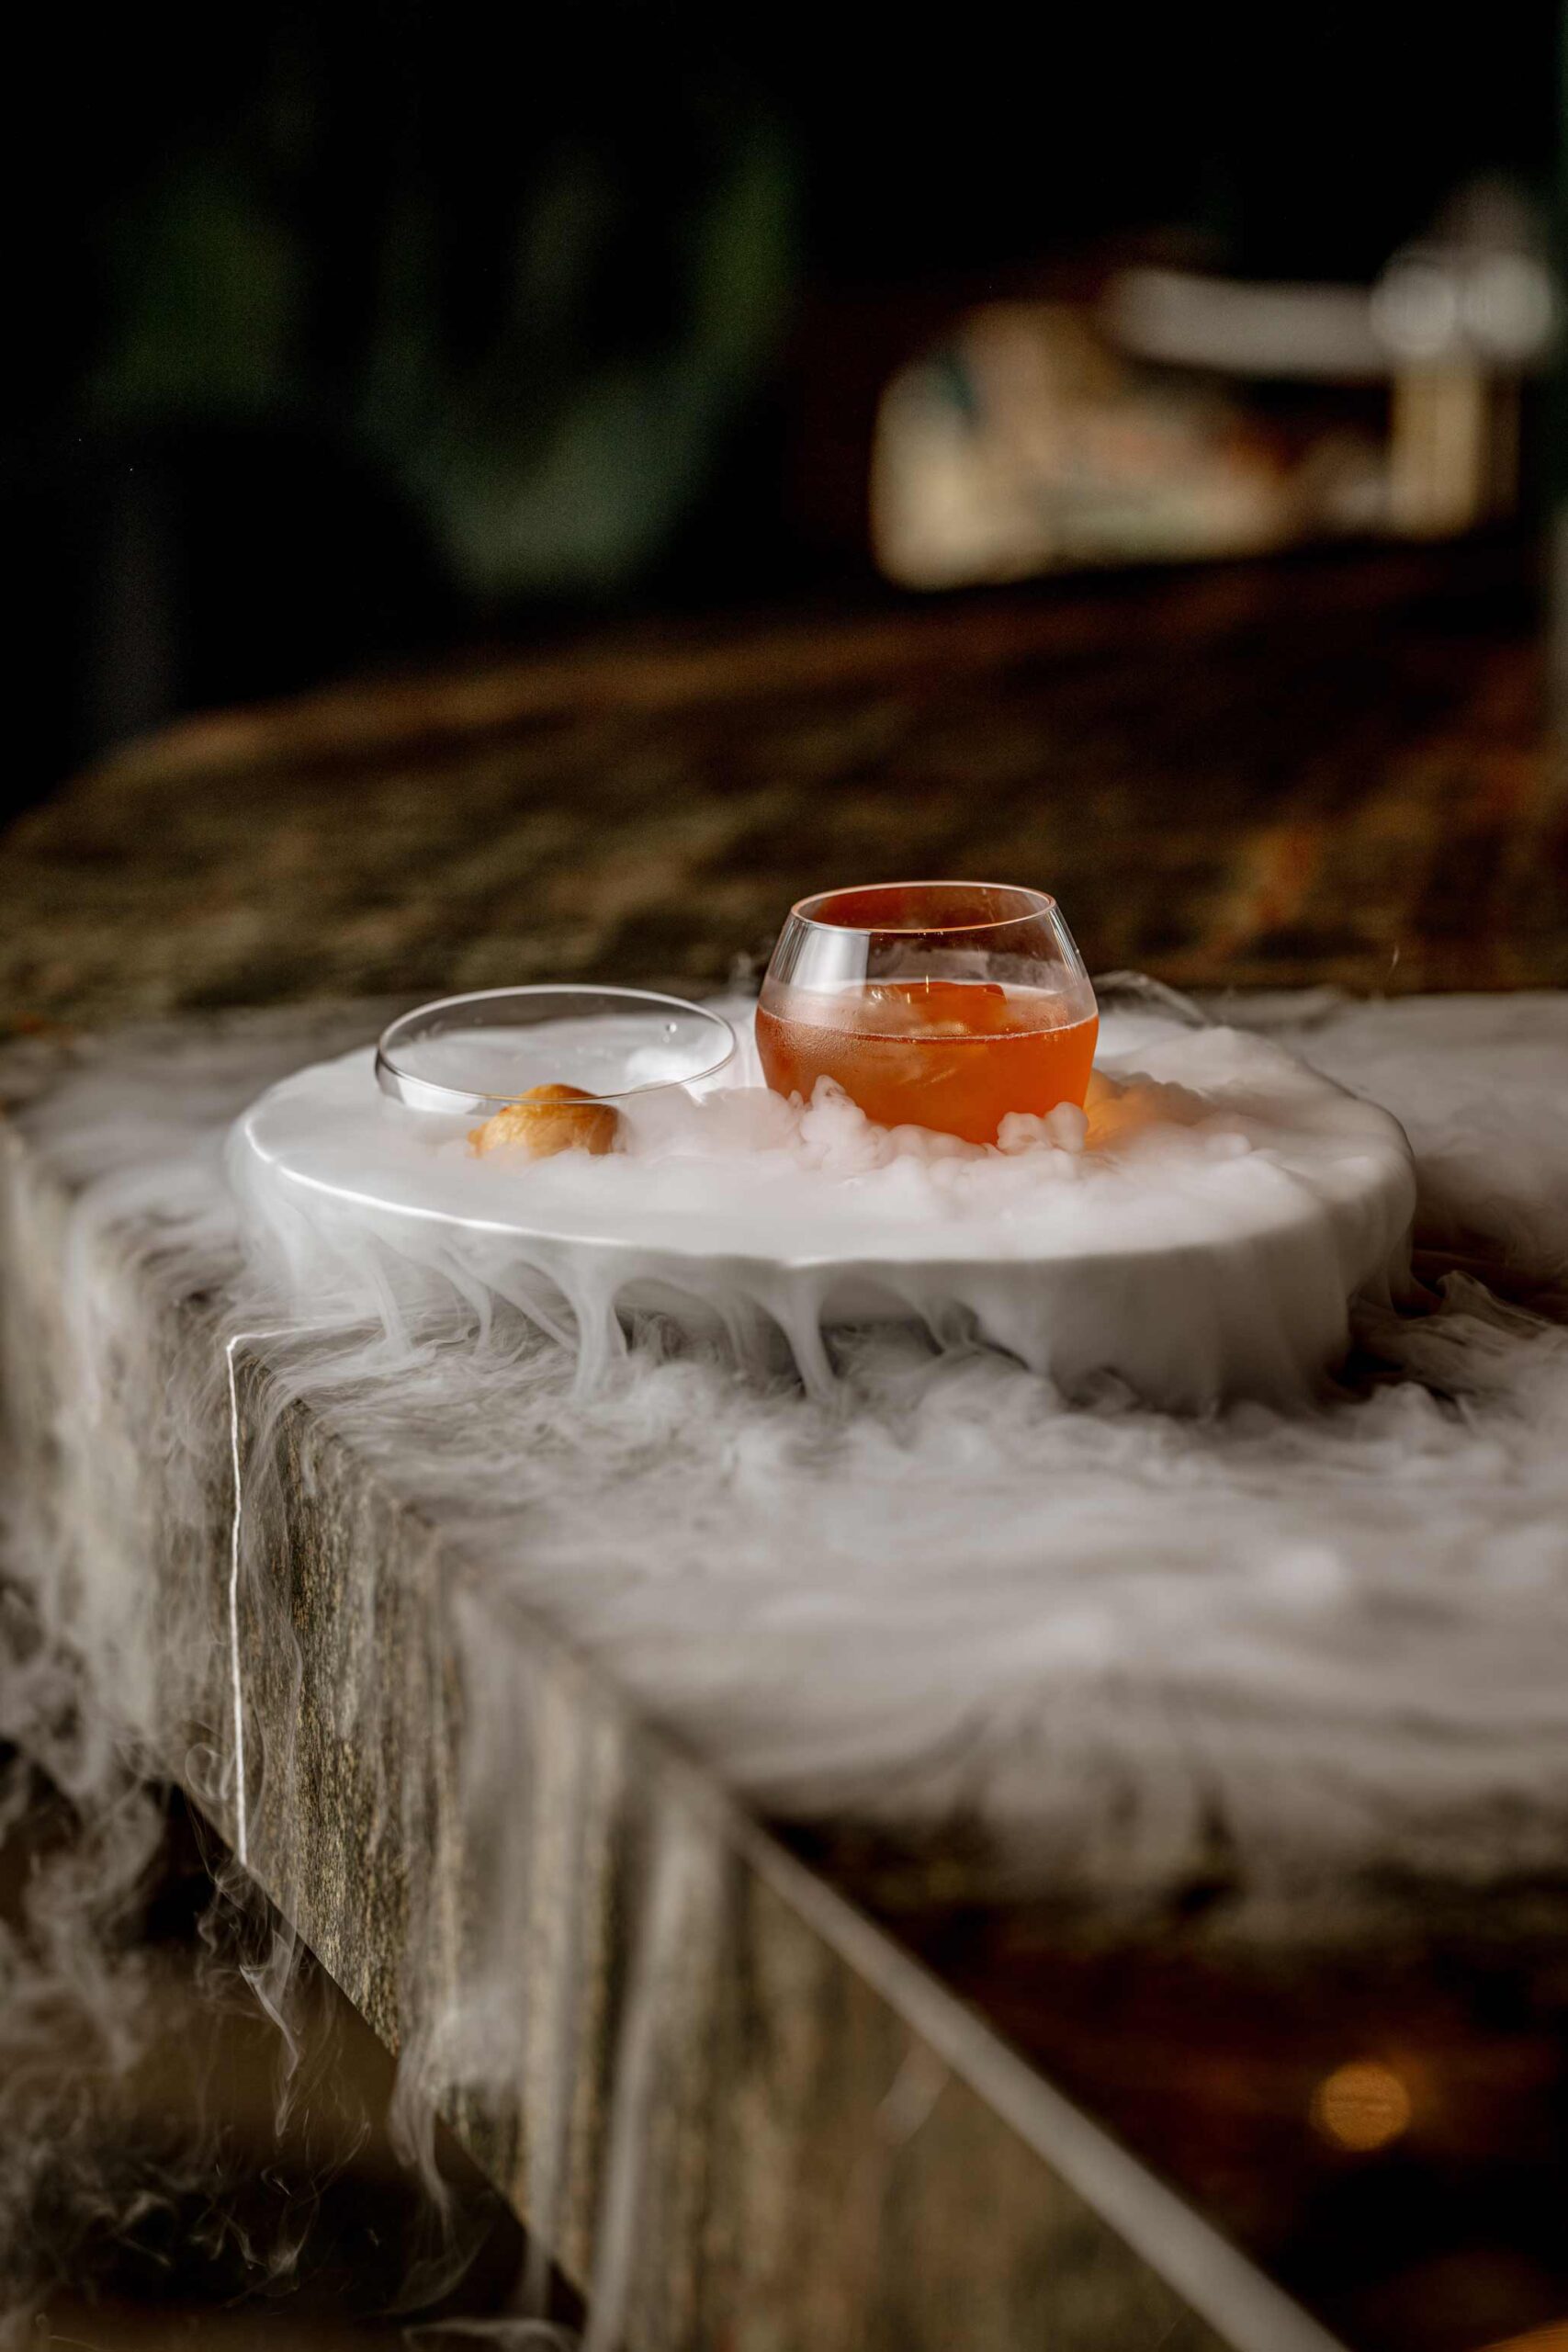 Brand new smokey cocktails with dry ice at Florattica Rooftop London